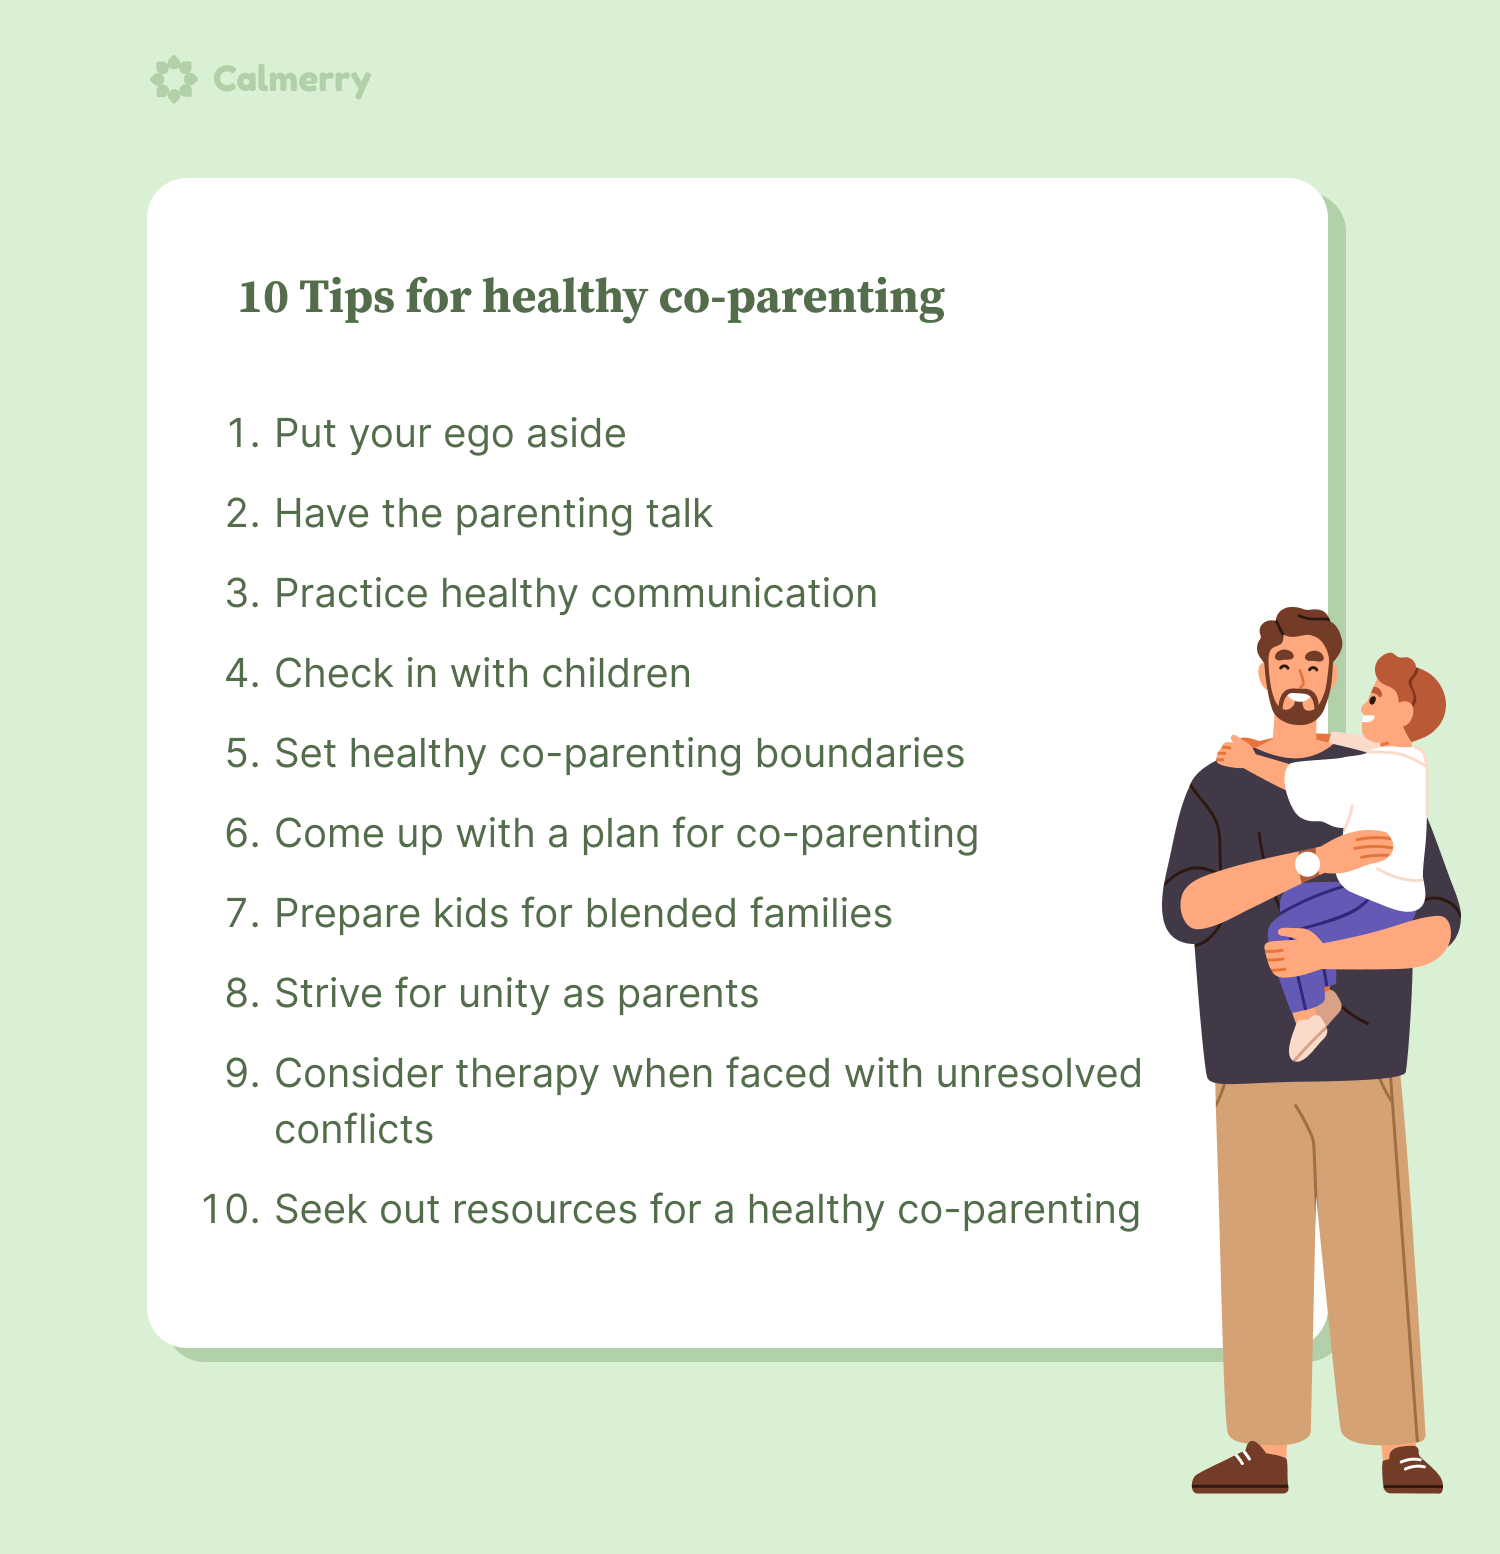 10 Tips for healthy co-parenting 1. Put your ego aside 2. Have the parenting talk 3. Practice healthy communication 4. Check in with children 5. Set healthy co-parenting boundaries 6. Come up with a plan for co-parenting 7. Prepare kids for blended families 8. Strive for unity as parents 9. Consider therapy when faced with unresolved conflicts 10. Seek out resources for a healthy co-parenting